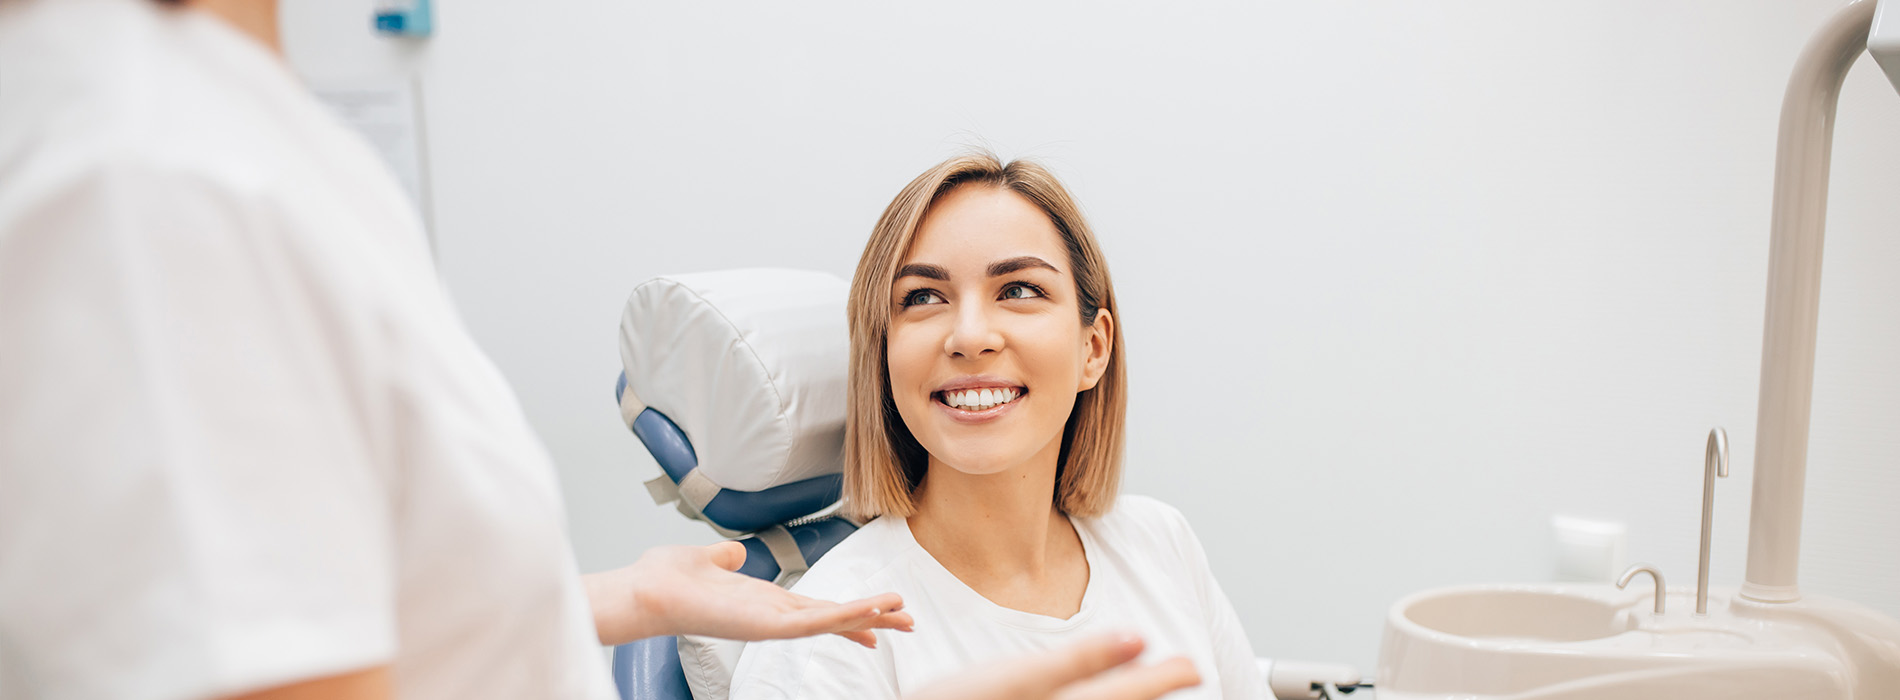 The image shows a dental professional interacting with a patient in a clinical setting.